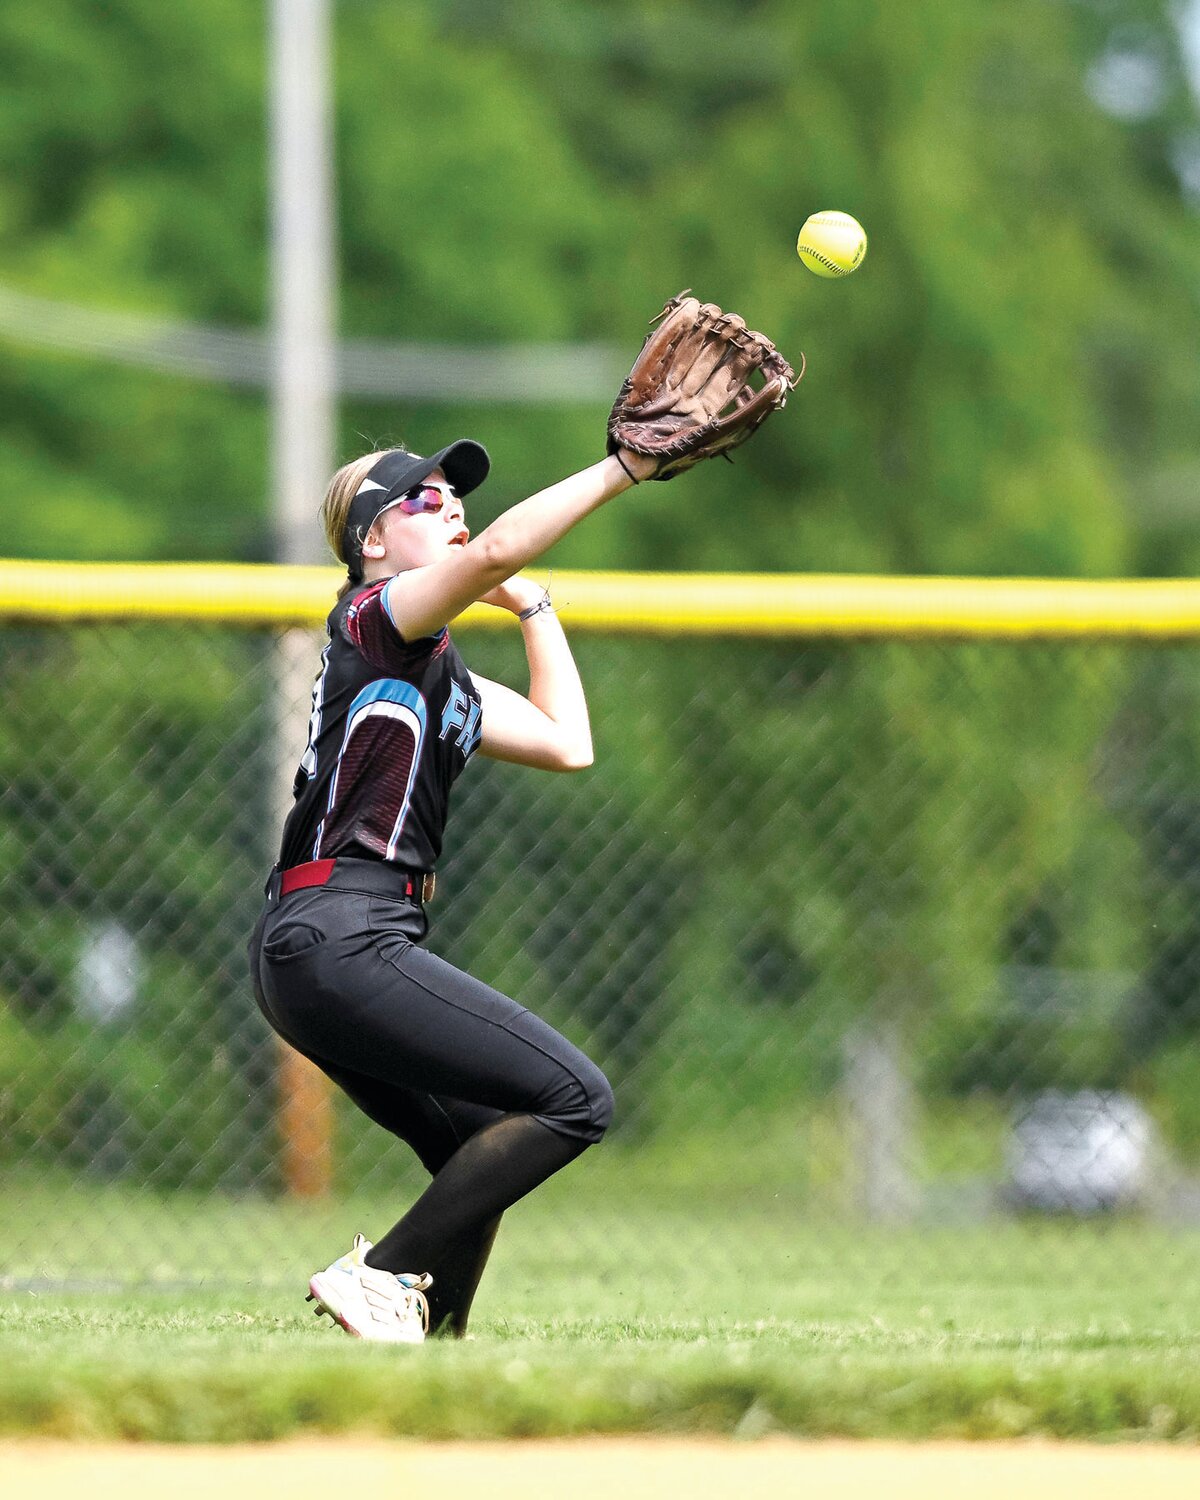 Faith Christian’s Lexi Reed makes a running catch during the bottom of the first inning.